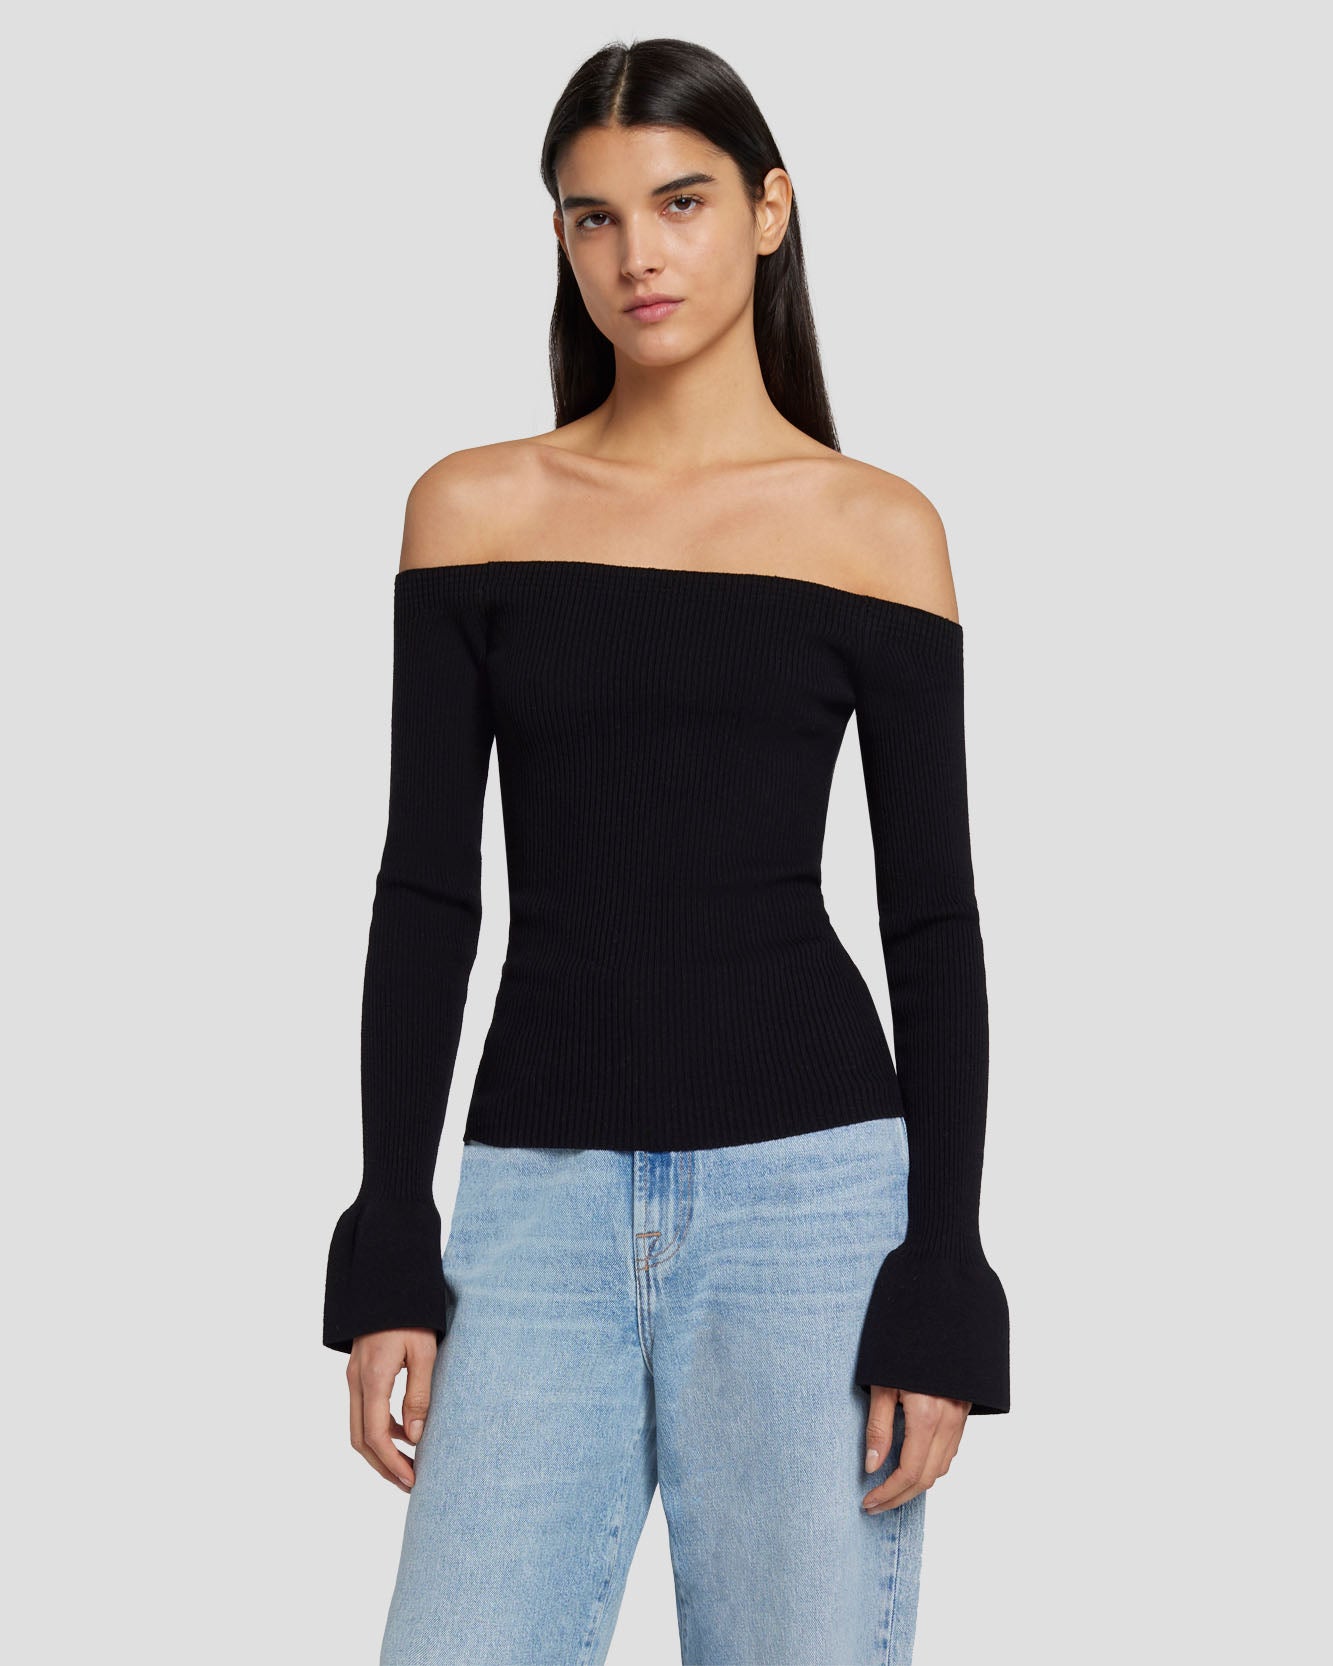 Off Shoulder Sweater in Black | 7 For All Mankind